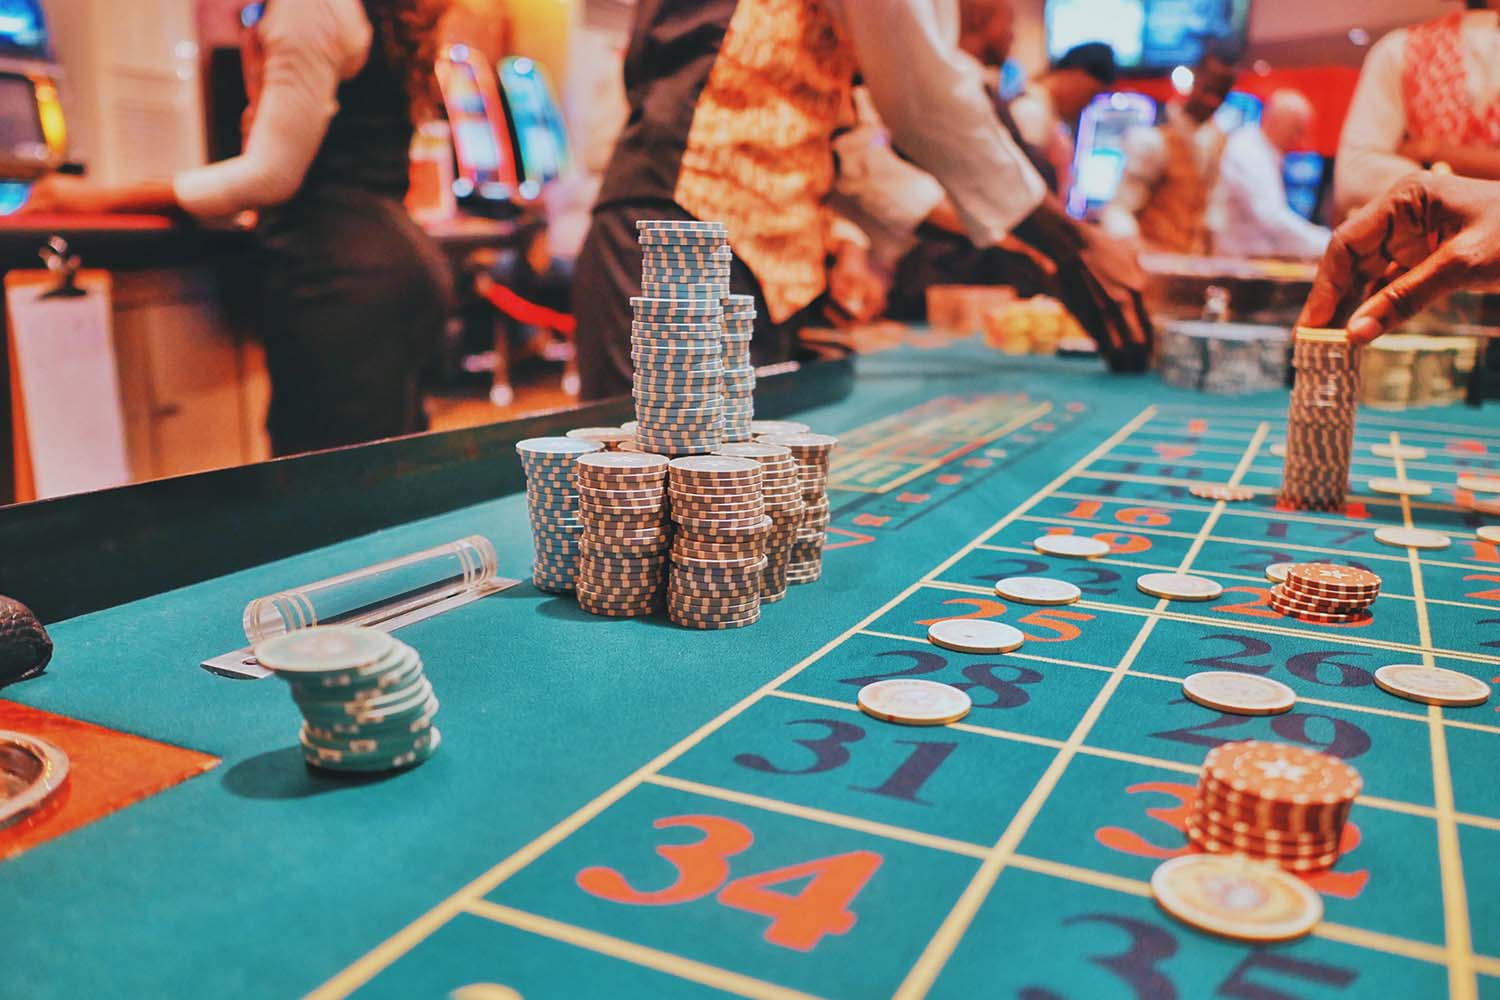 Building Relationships With online casino apps